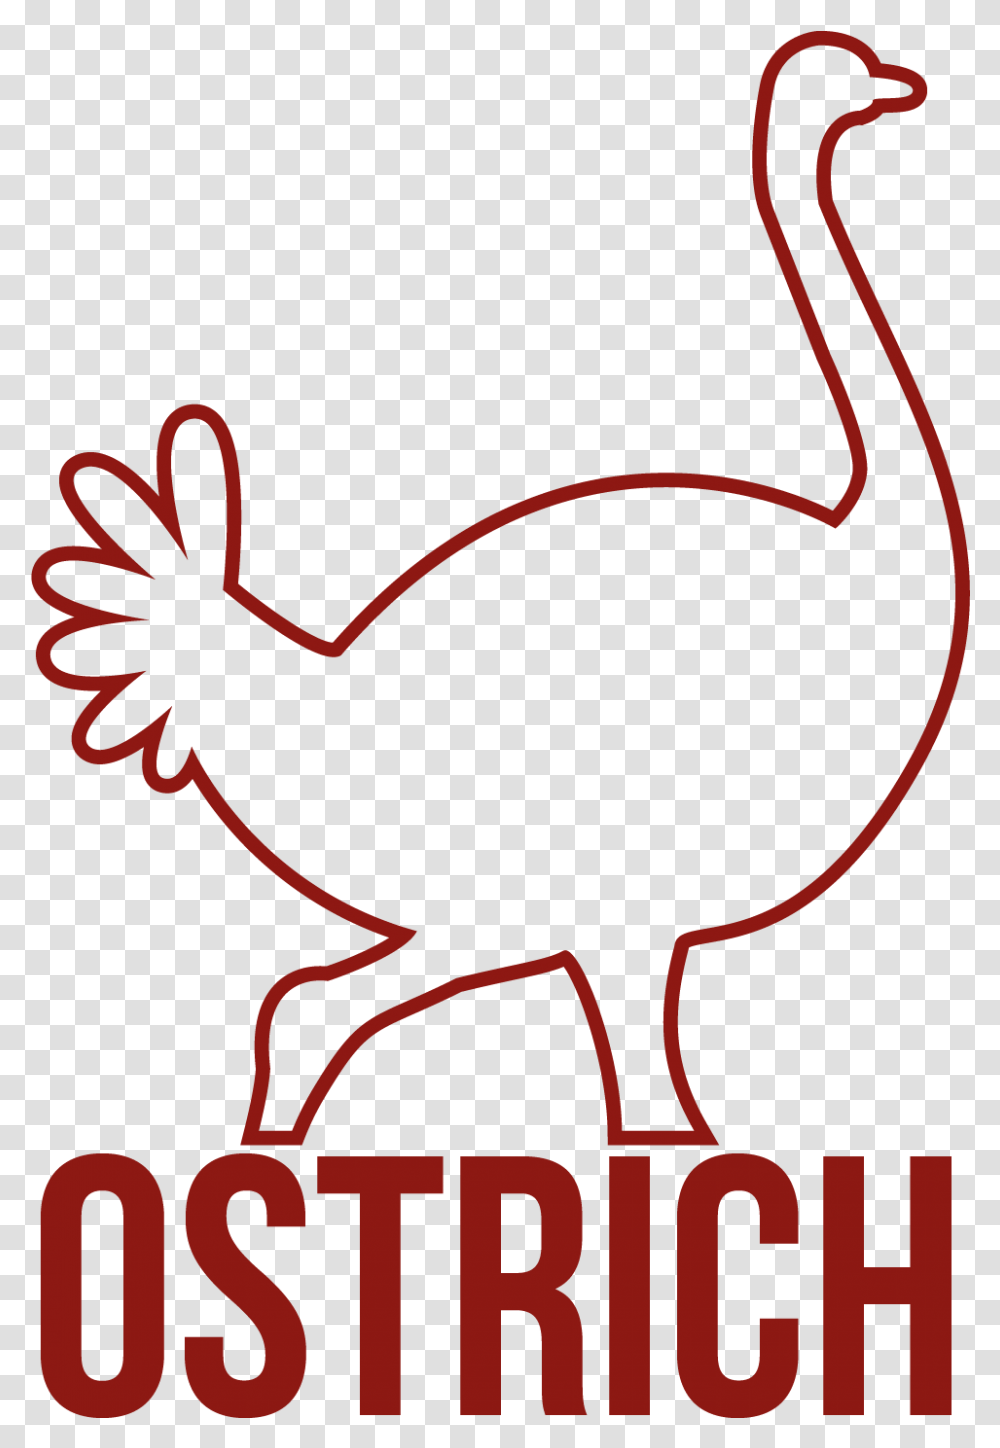 Ostrich Water Bird, Animal, Fowl, Poultry, Antelope Transparent Png